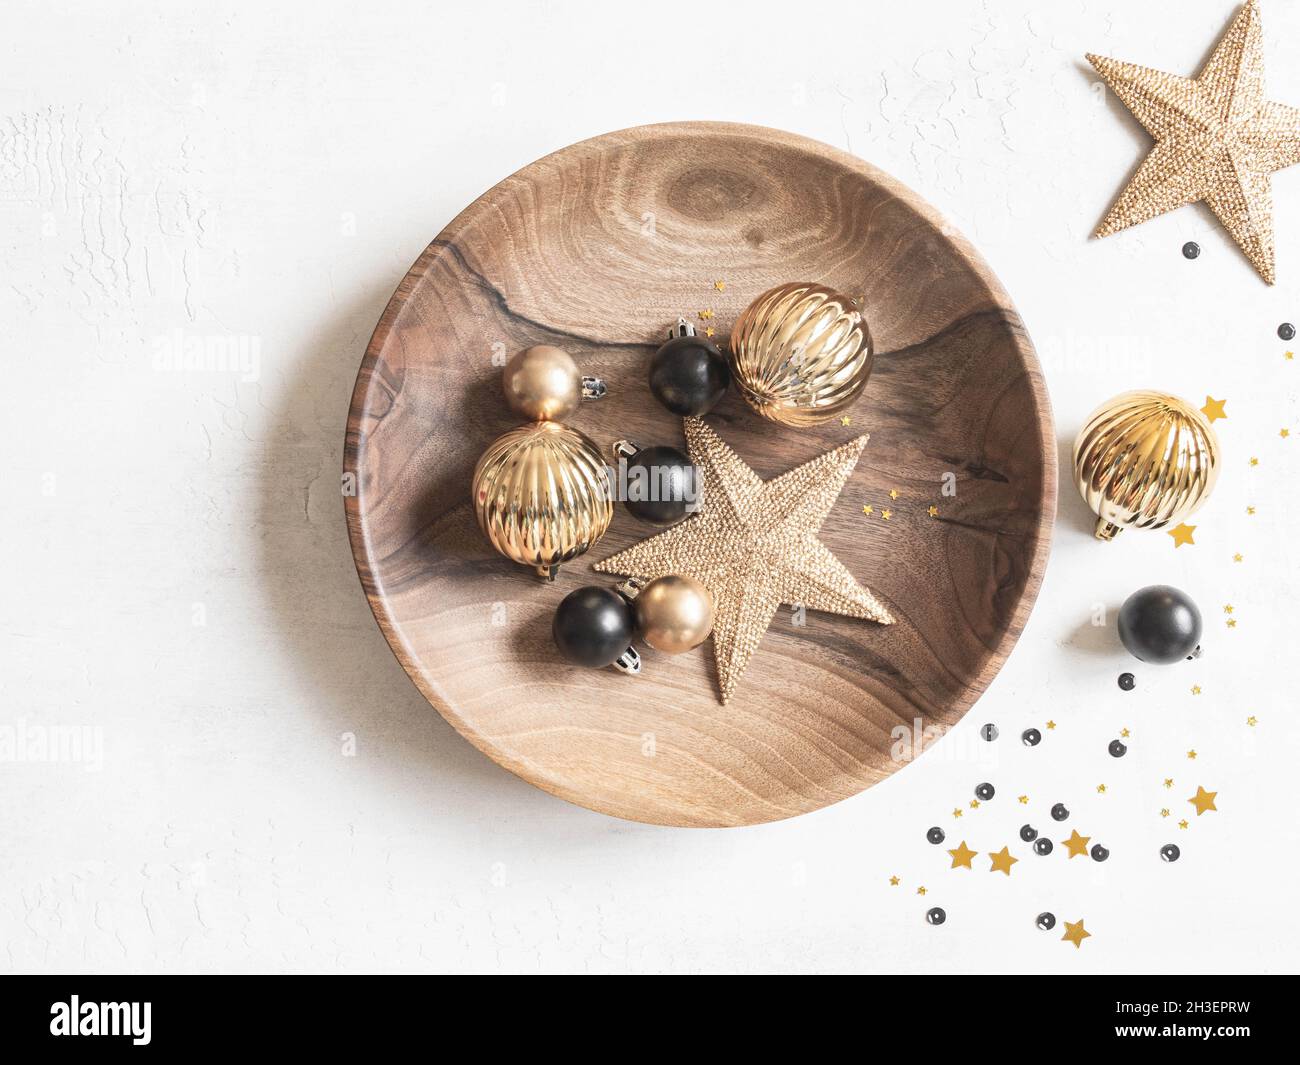 Christmas or New Year background - wooden plate with various Christmas balls and gold star on white background. Decorations for home, holiday decor. Stock Photo